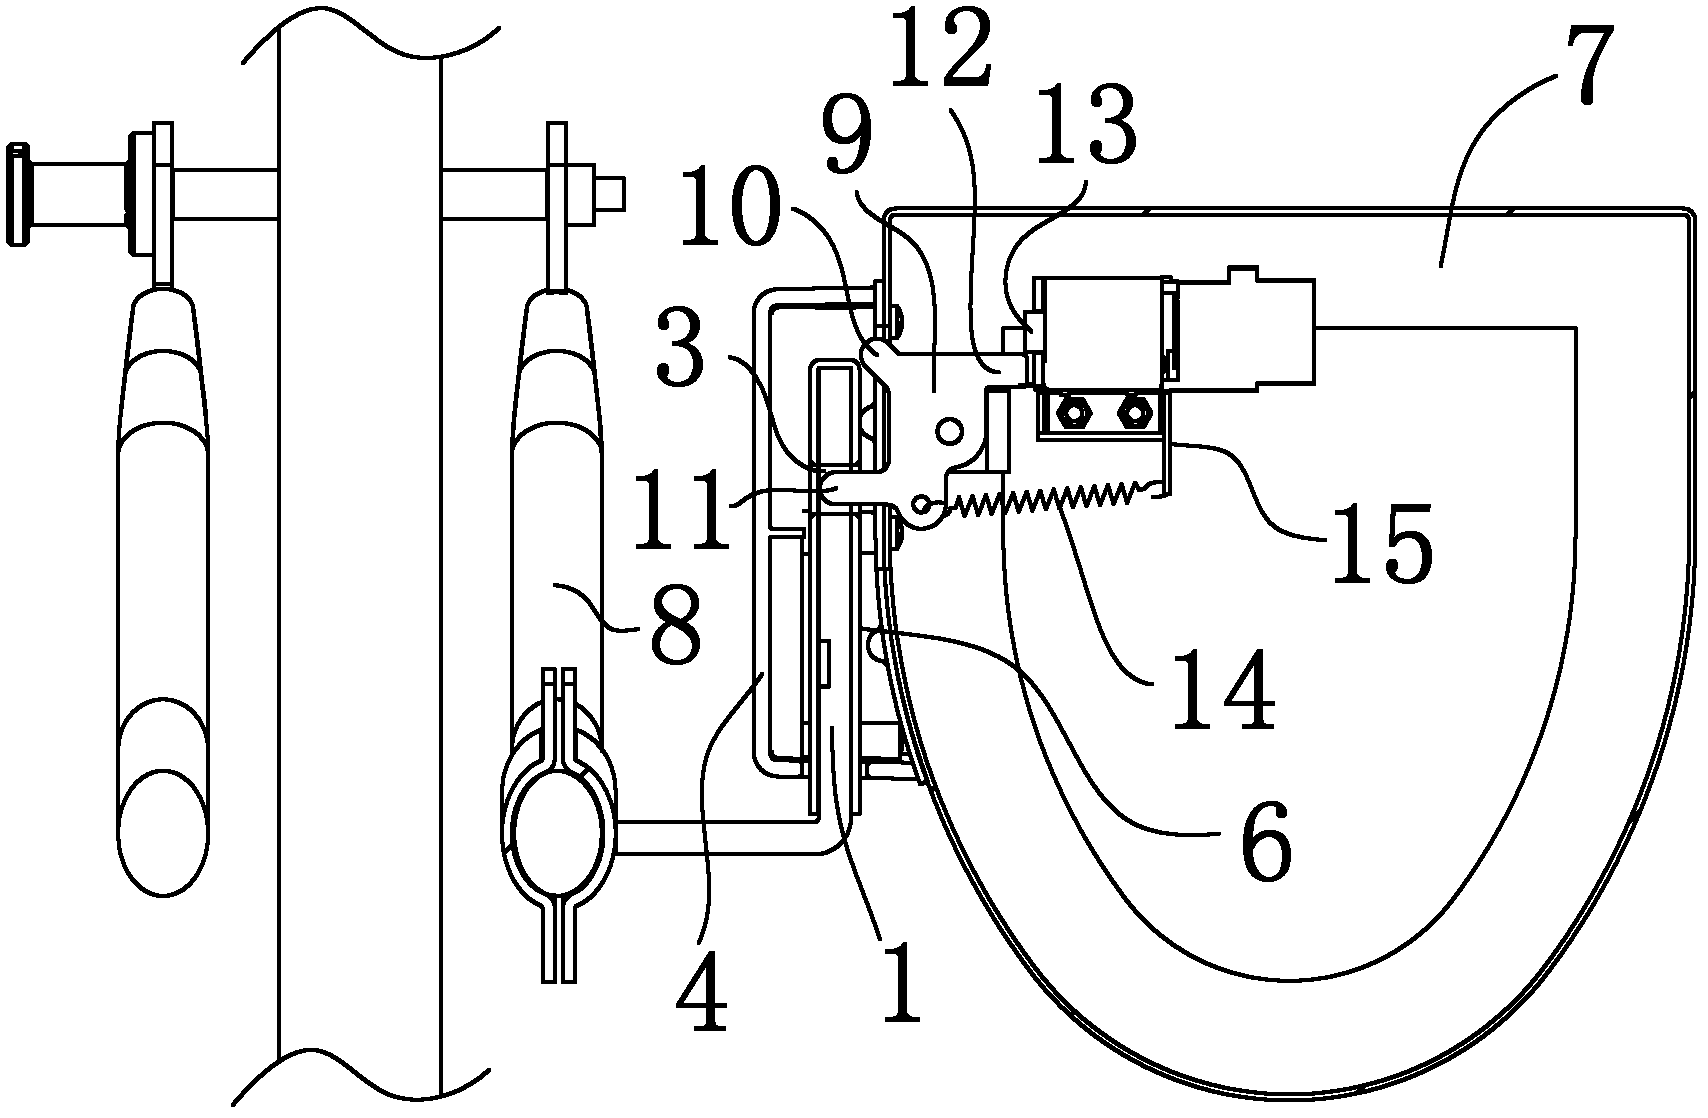 Locking and parking space system convenient for releasing and recovering keys and parking method of the system